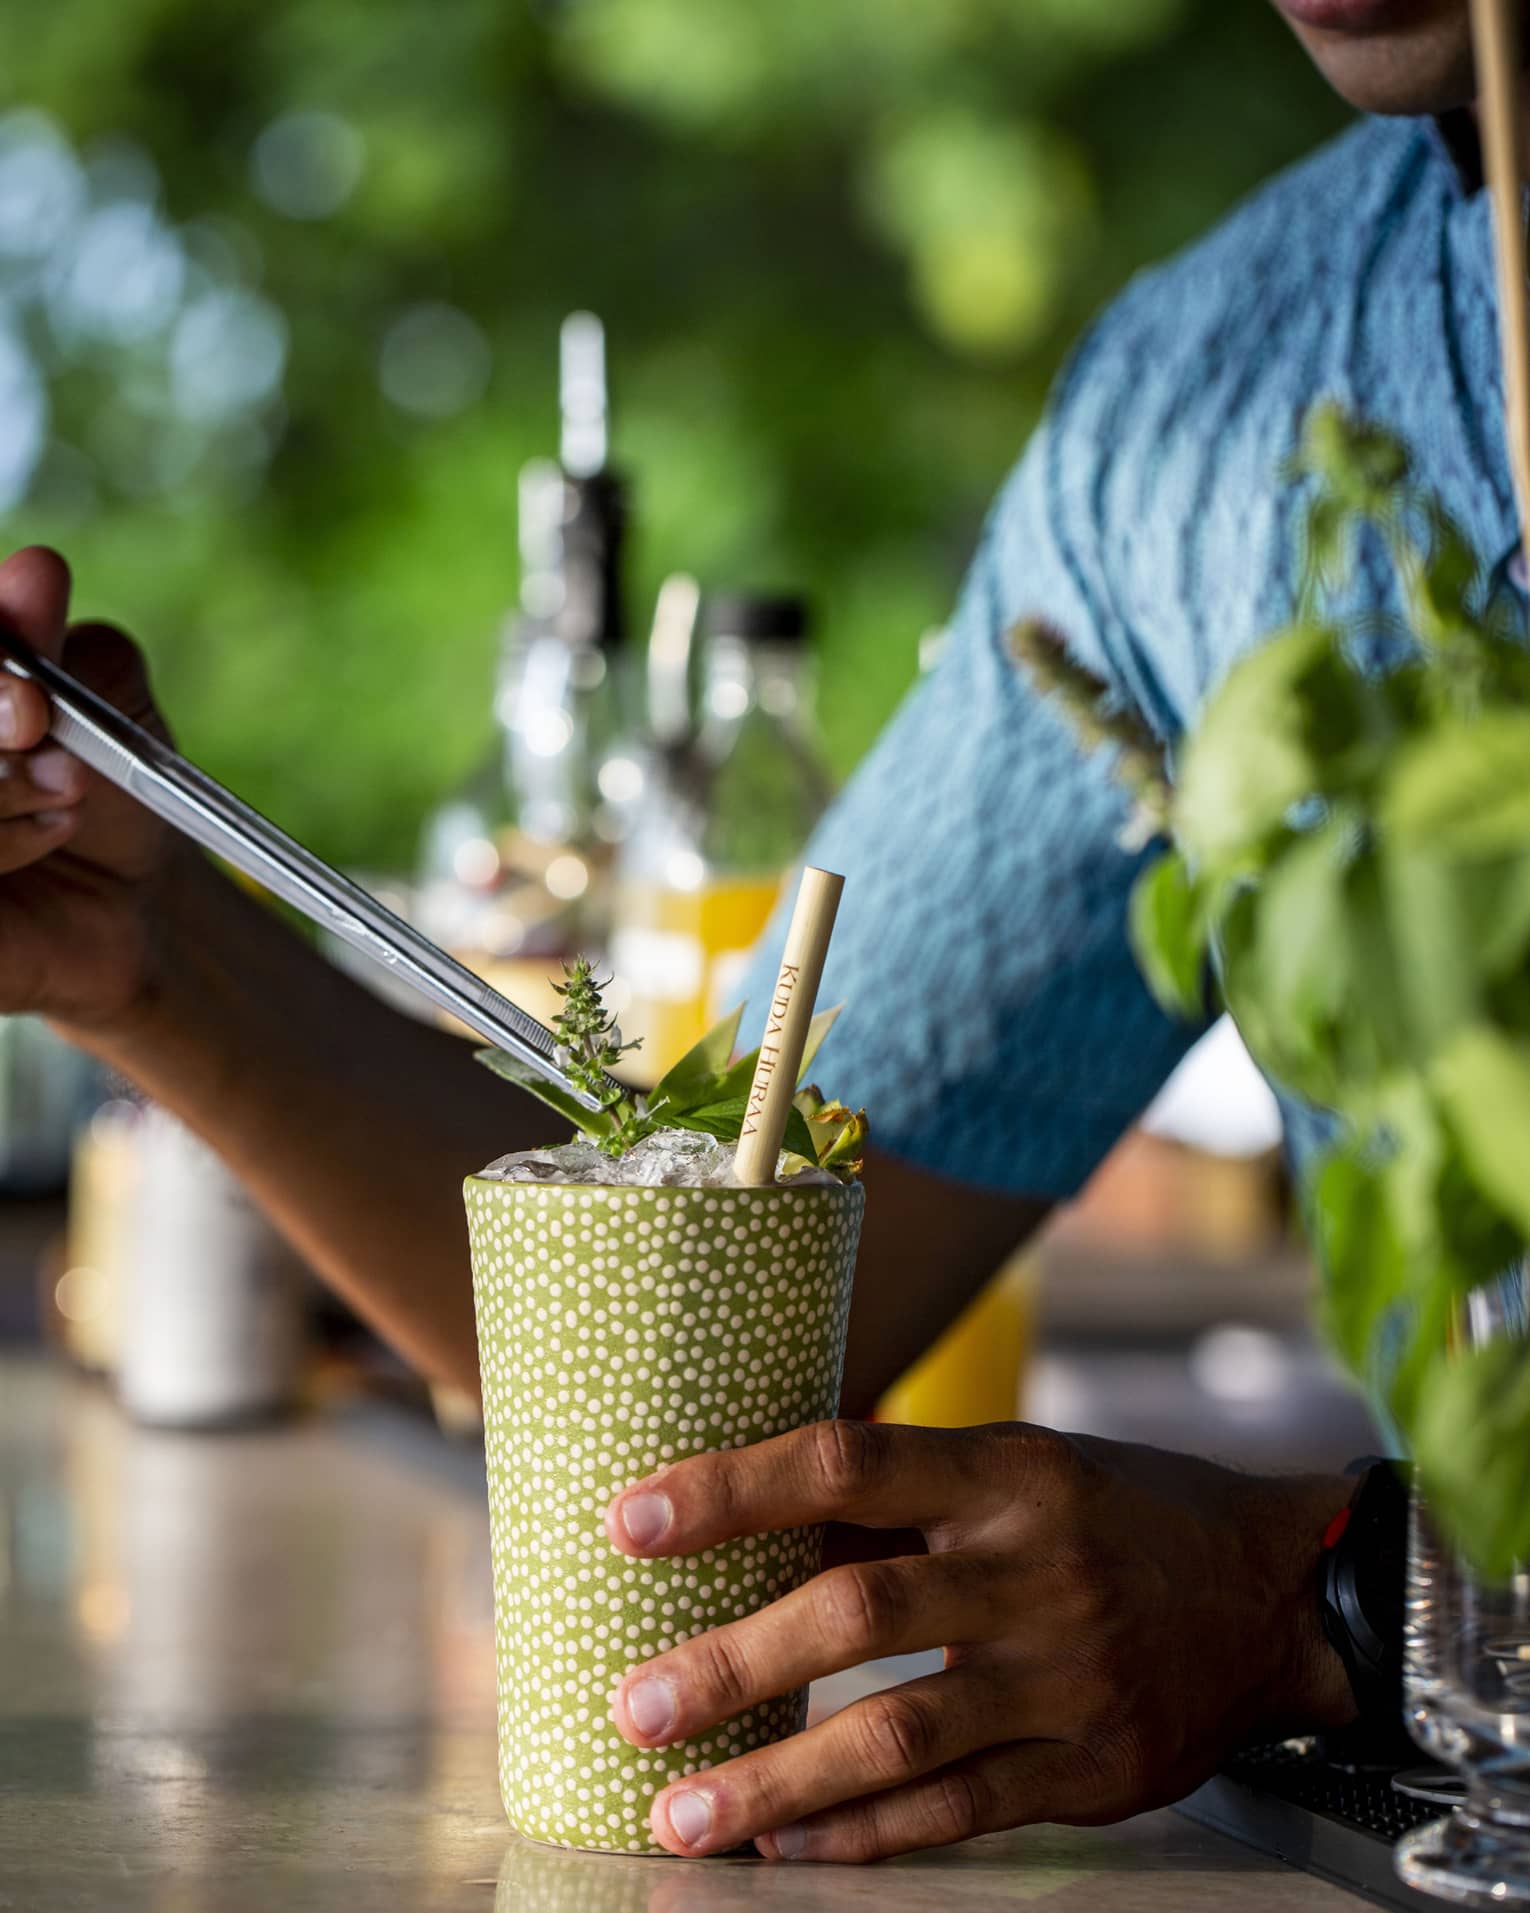 A smiling bartender in a blue shirt garnishes a cocktail; blurred bottles of liquor and green foliage in the background.